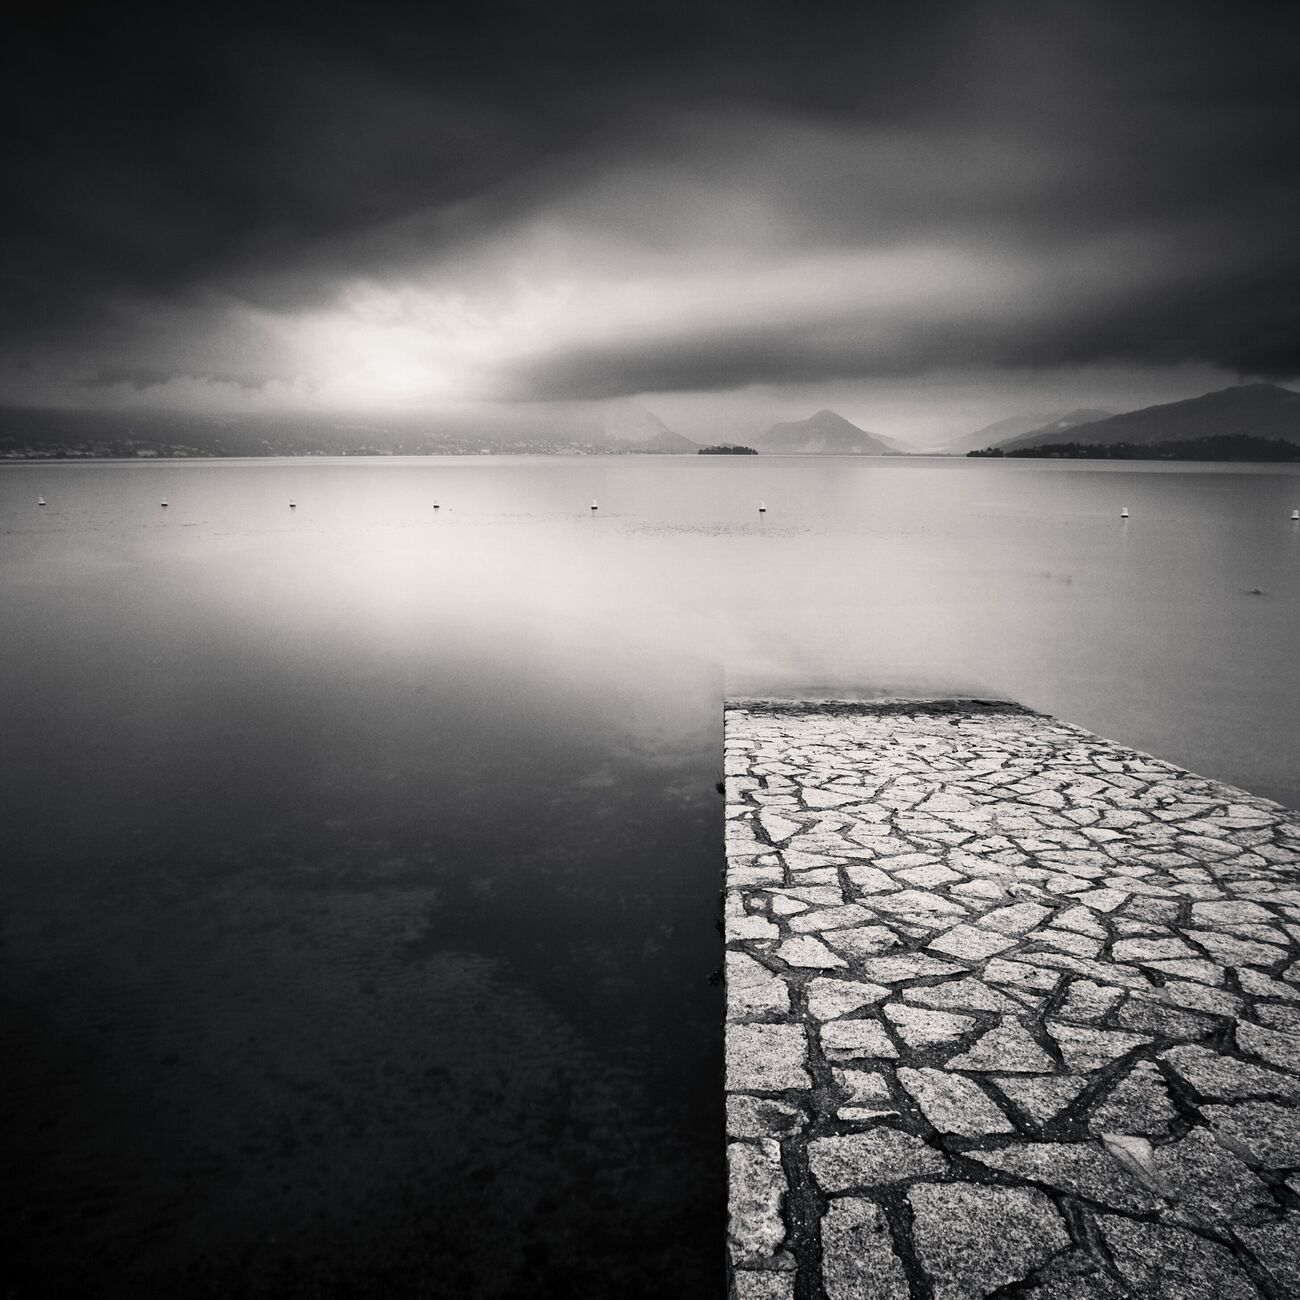 Paved Ramp, Etude 1, Lake Maggiore, Italy. August 2014. Ref-1302 - Denis Olivier Art Photography